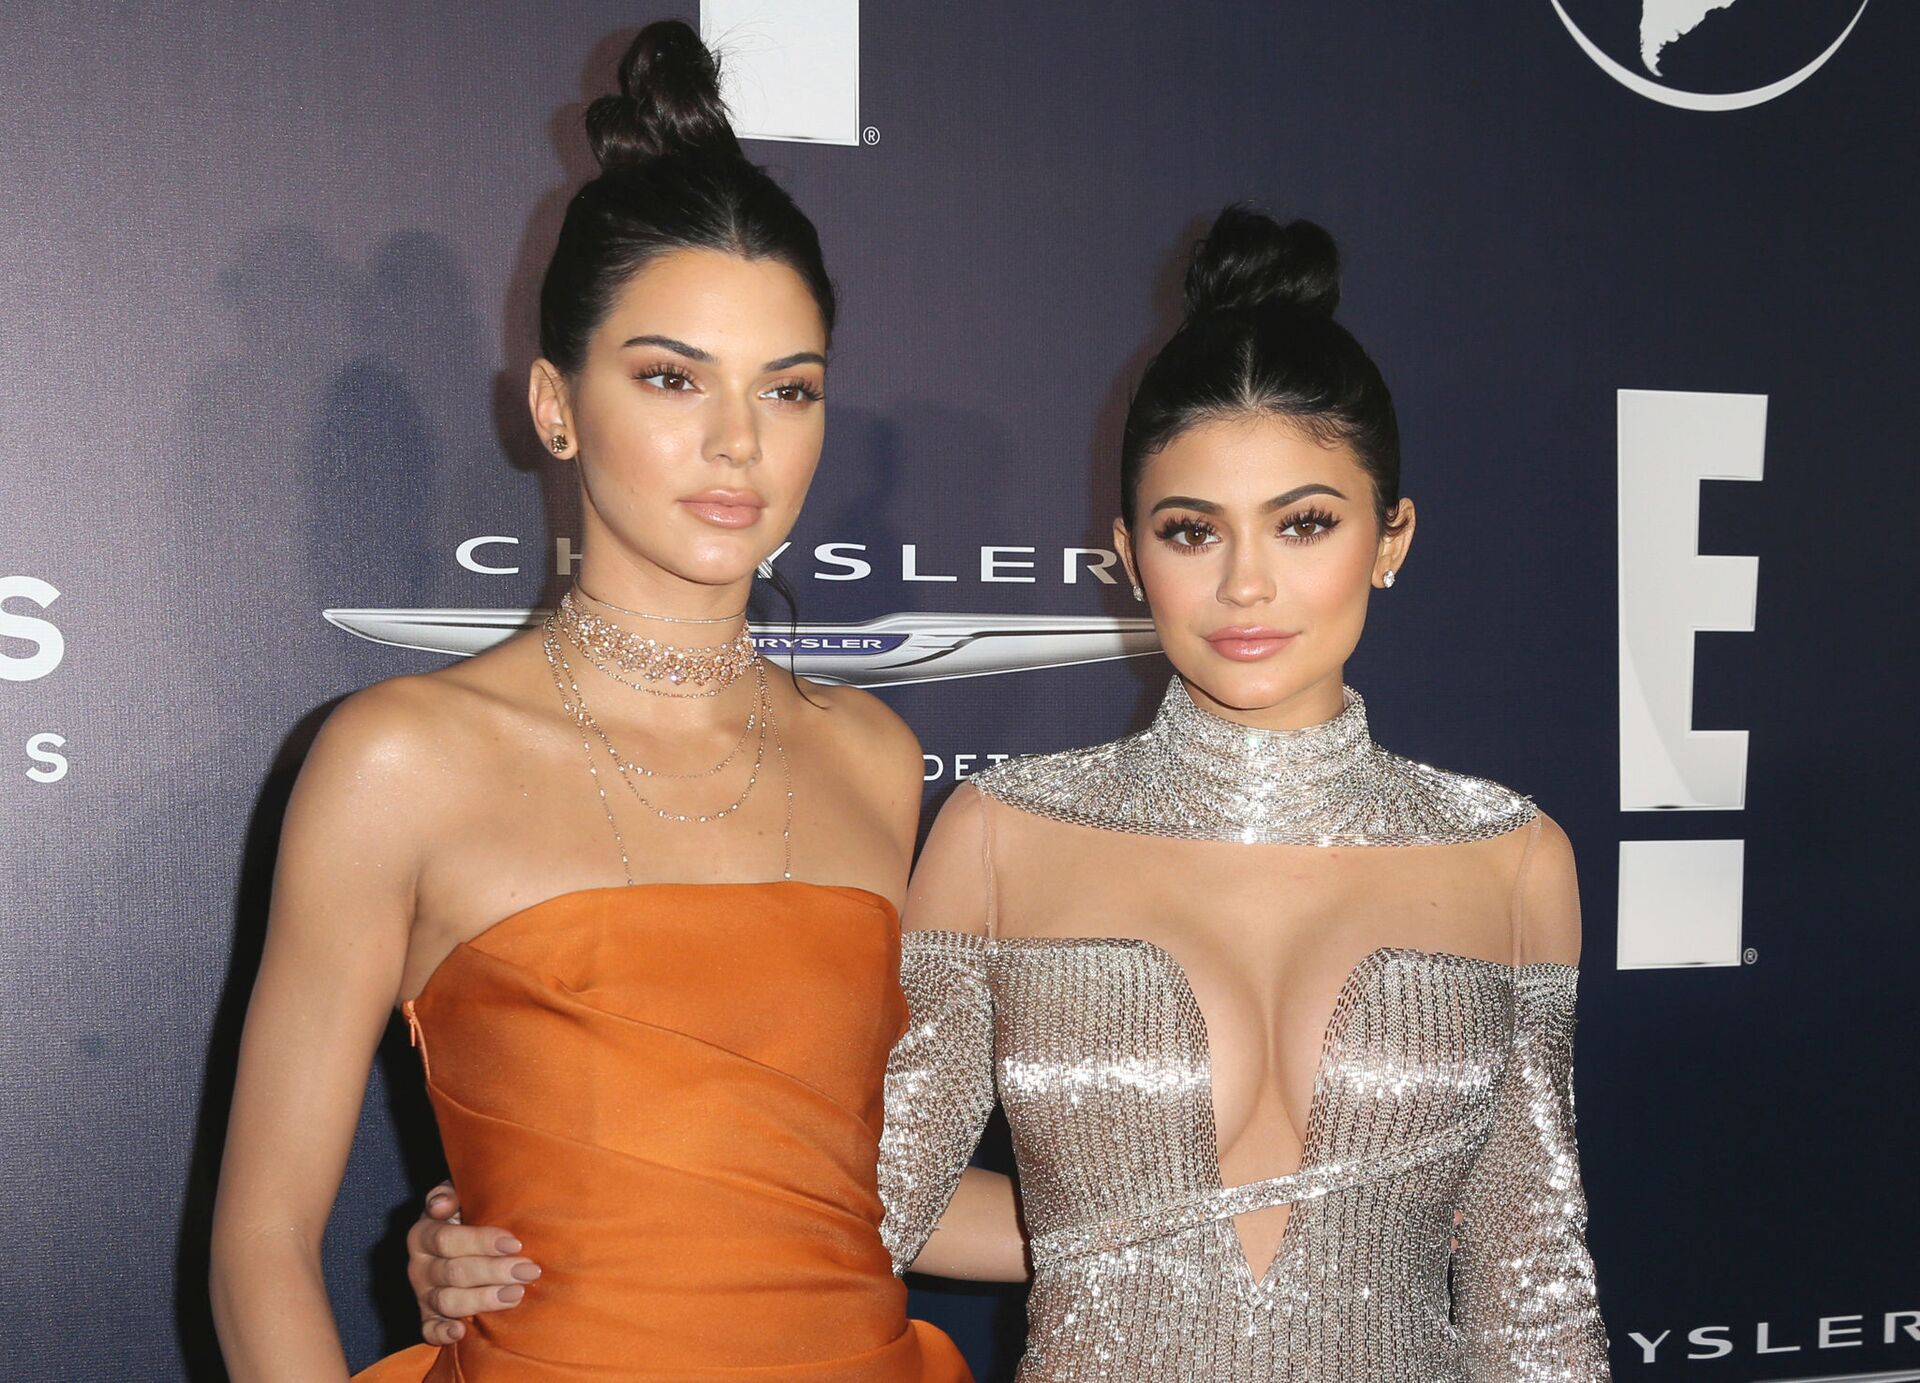  Kendall Jenner, left, and Kylie Jenner arrive at the NBCUniversal Golden Globes afterparty in Beverly Hills - Sputnik International, 1920, 27.06.2022